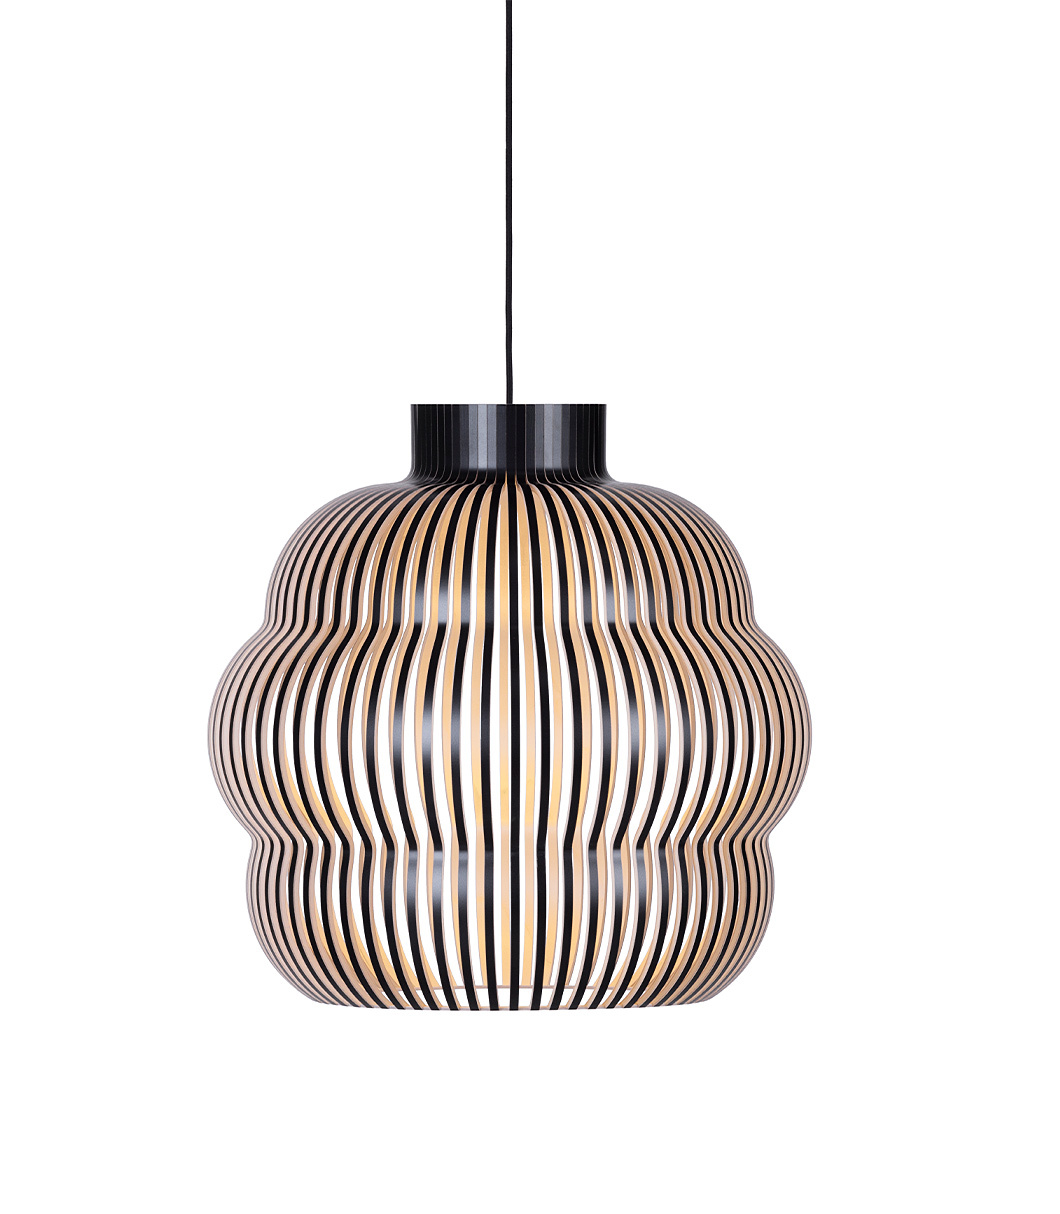 Kumulo 5200 pendant lamp is available in black laminated